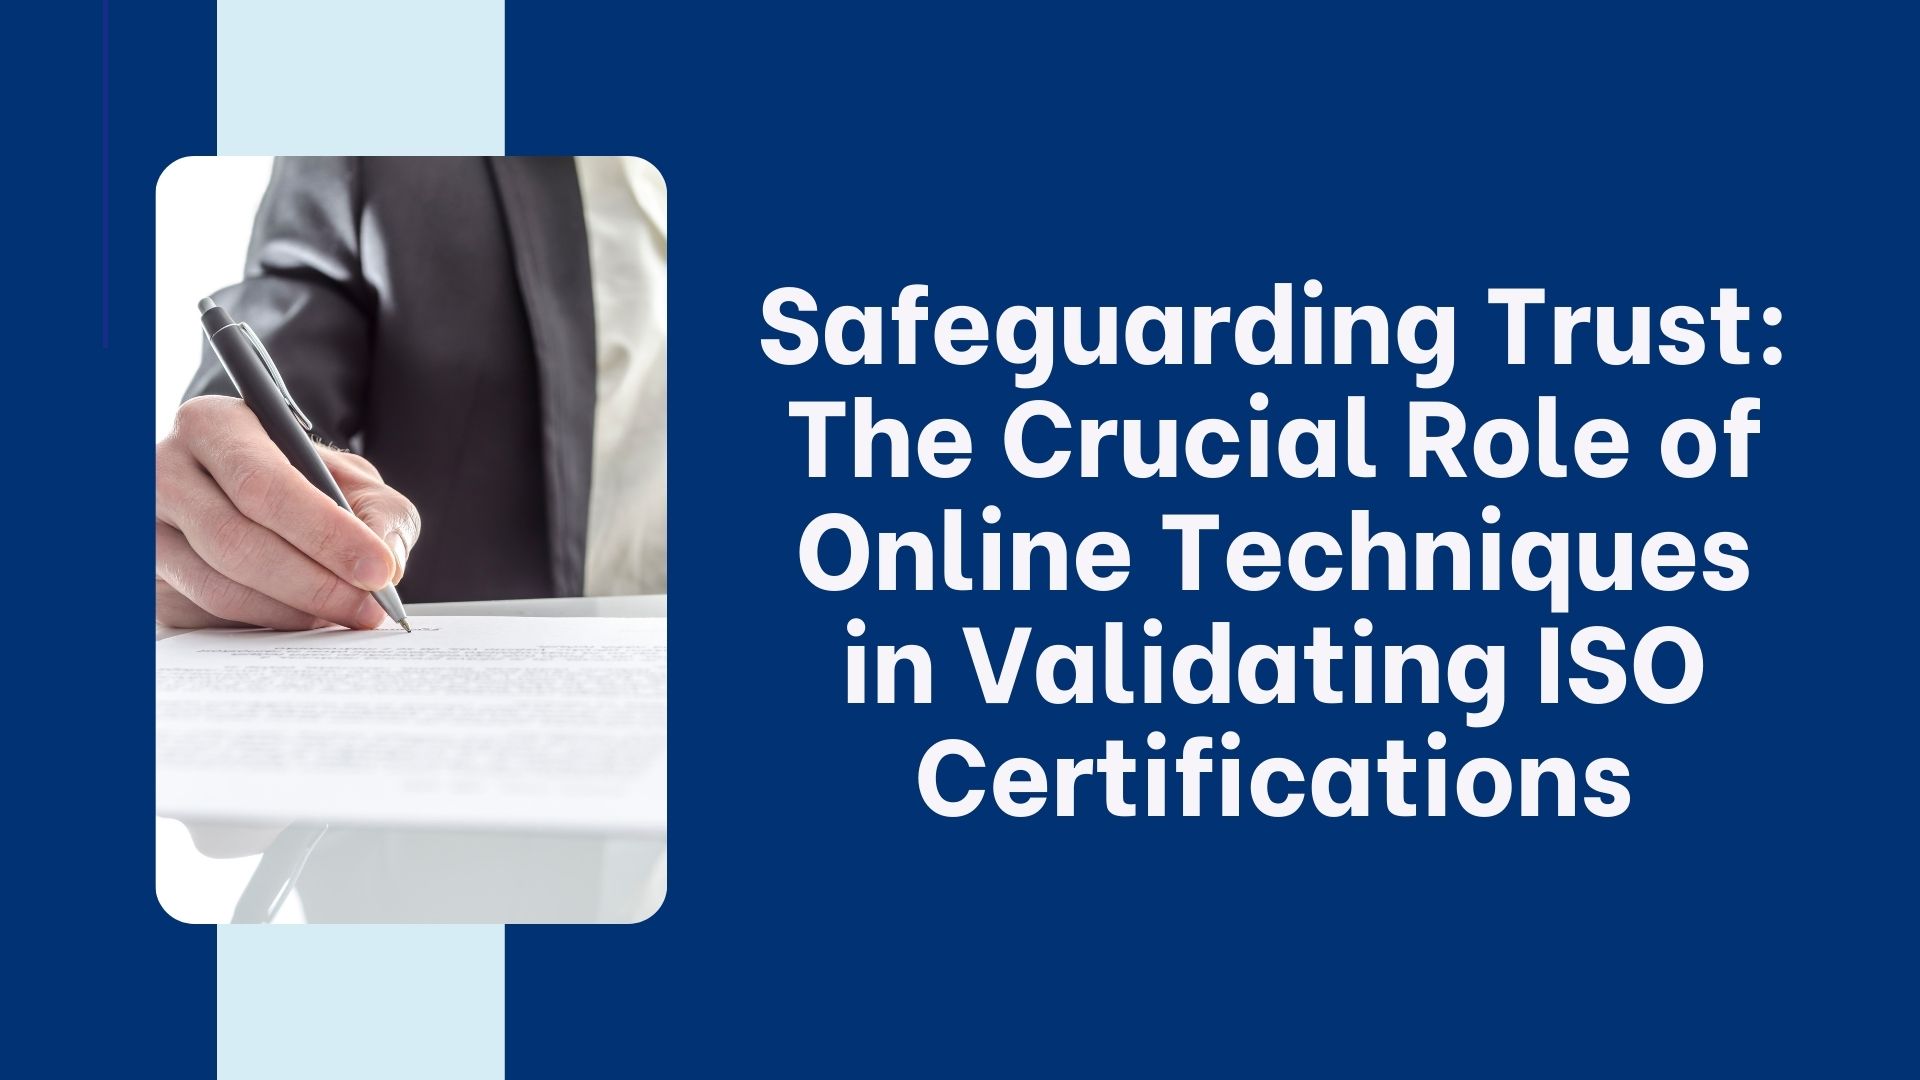 Safeguarding Trust: The Crucial Role of Online Techniques in Validating ISO Certifications